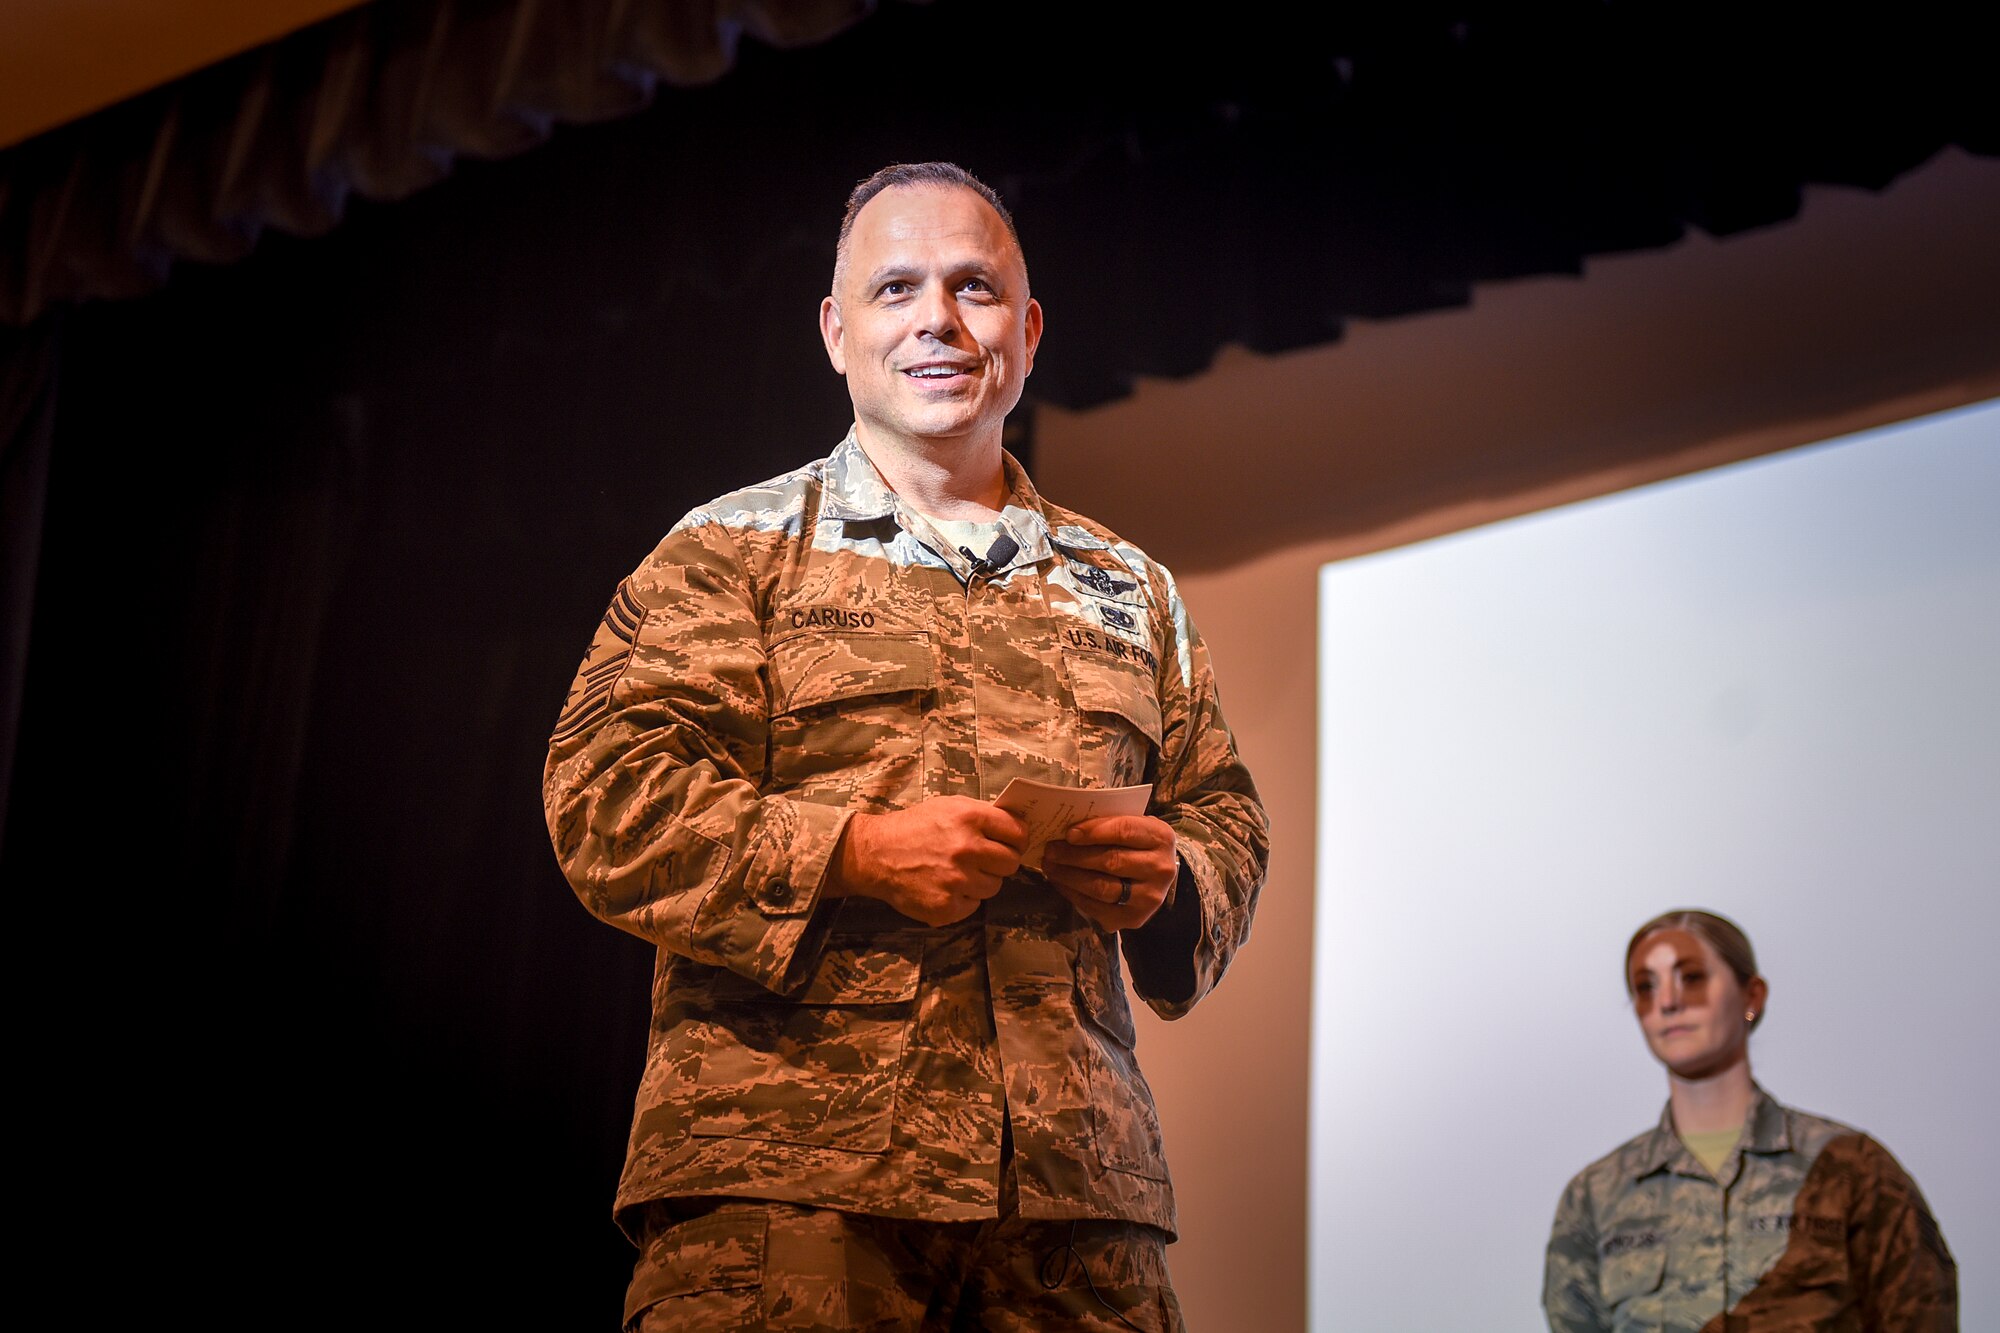 Chief Master Sgt. Matthew Caruso, command senior enlisted leader of U.S. Transportation Command, speaks to senior NCOs Feb. 15, 2018, during an all call at the theater on Seymour Johnson Air Force Base, North Carolina.